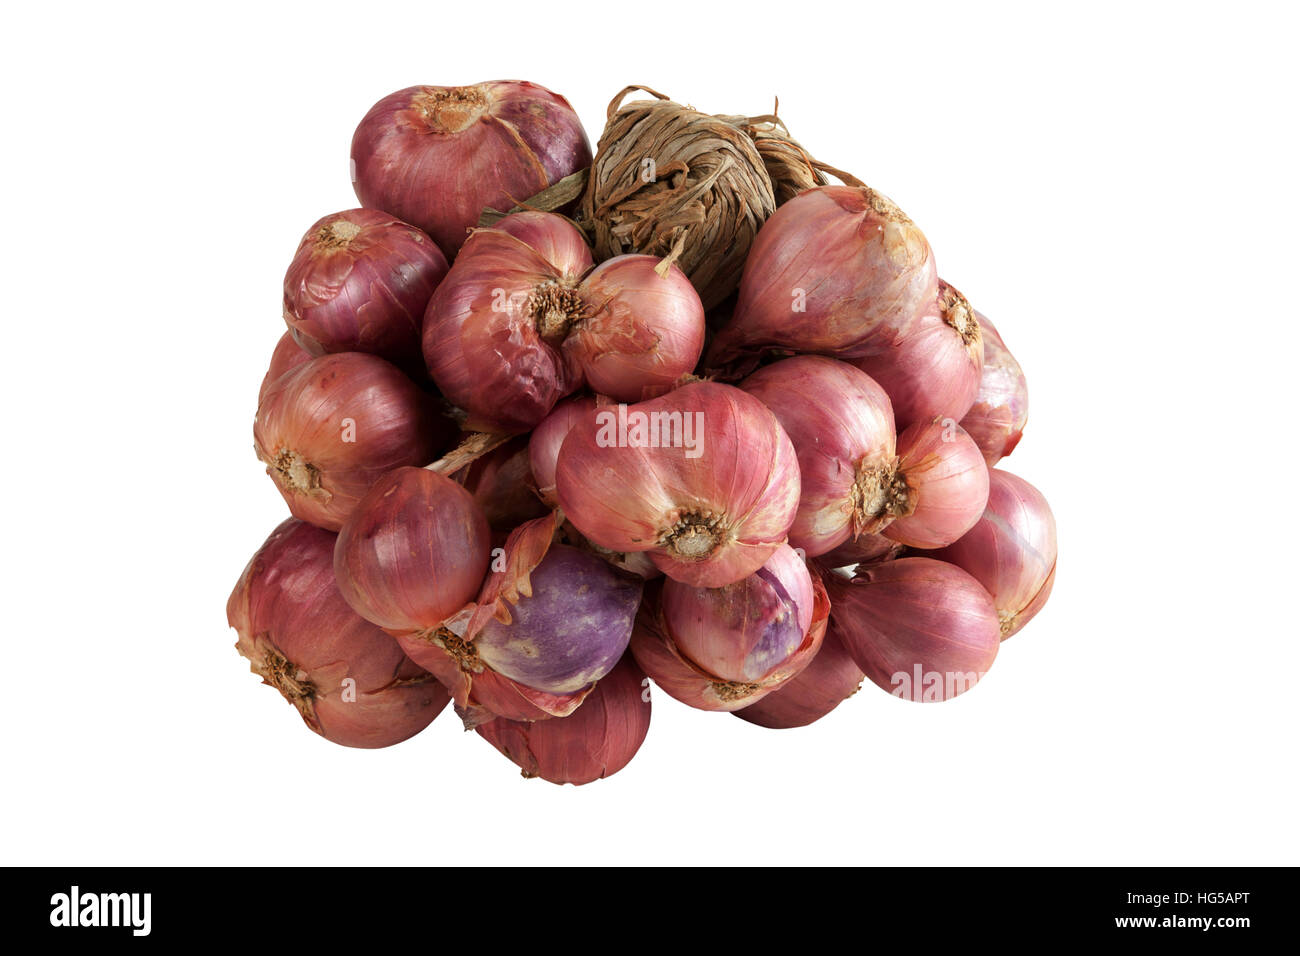 5,596 Shallots Growing Images, Stock Photos, 3D objects, & Vectors